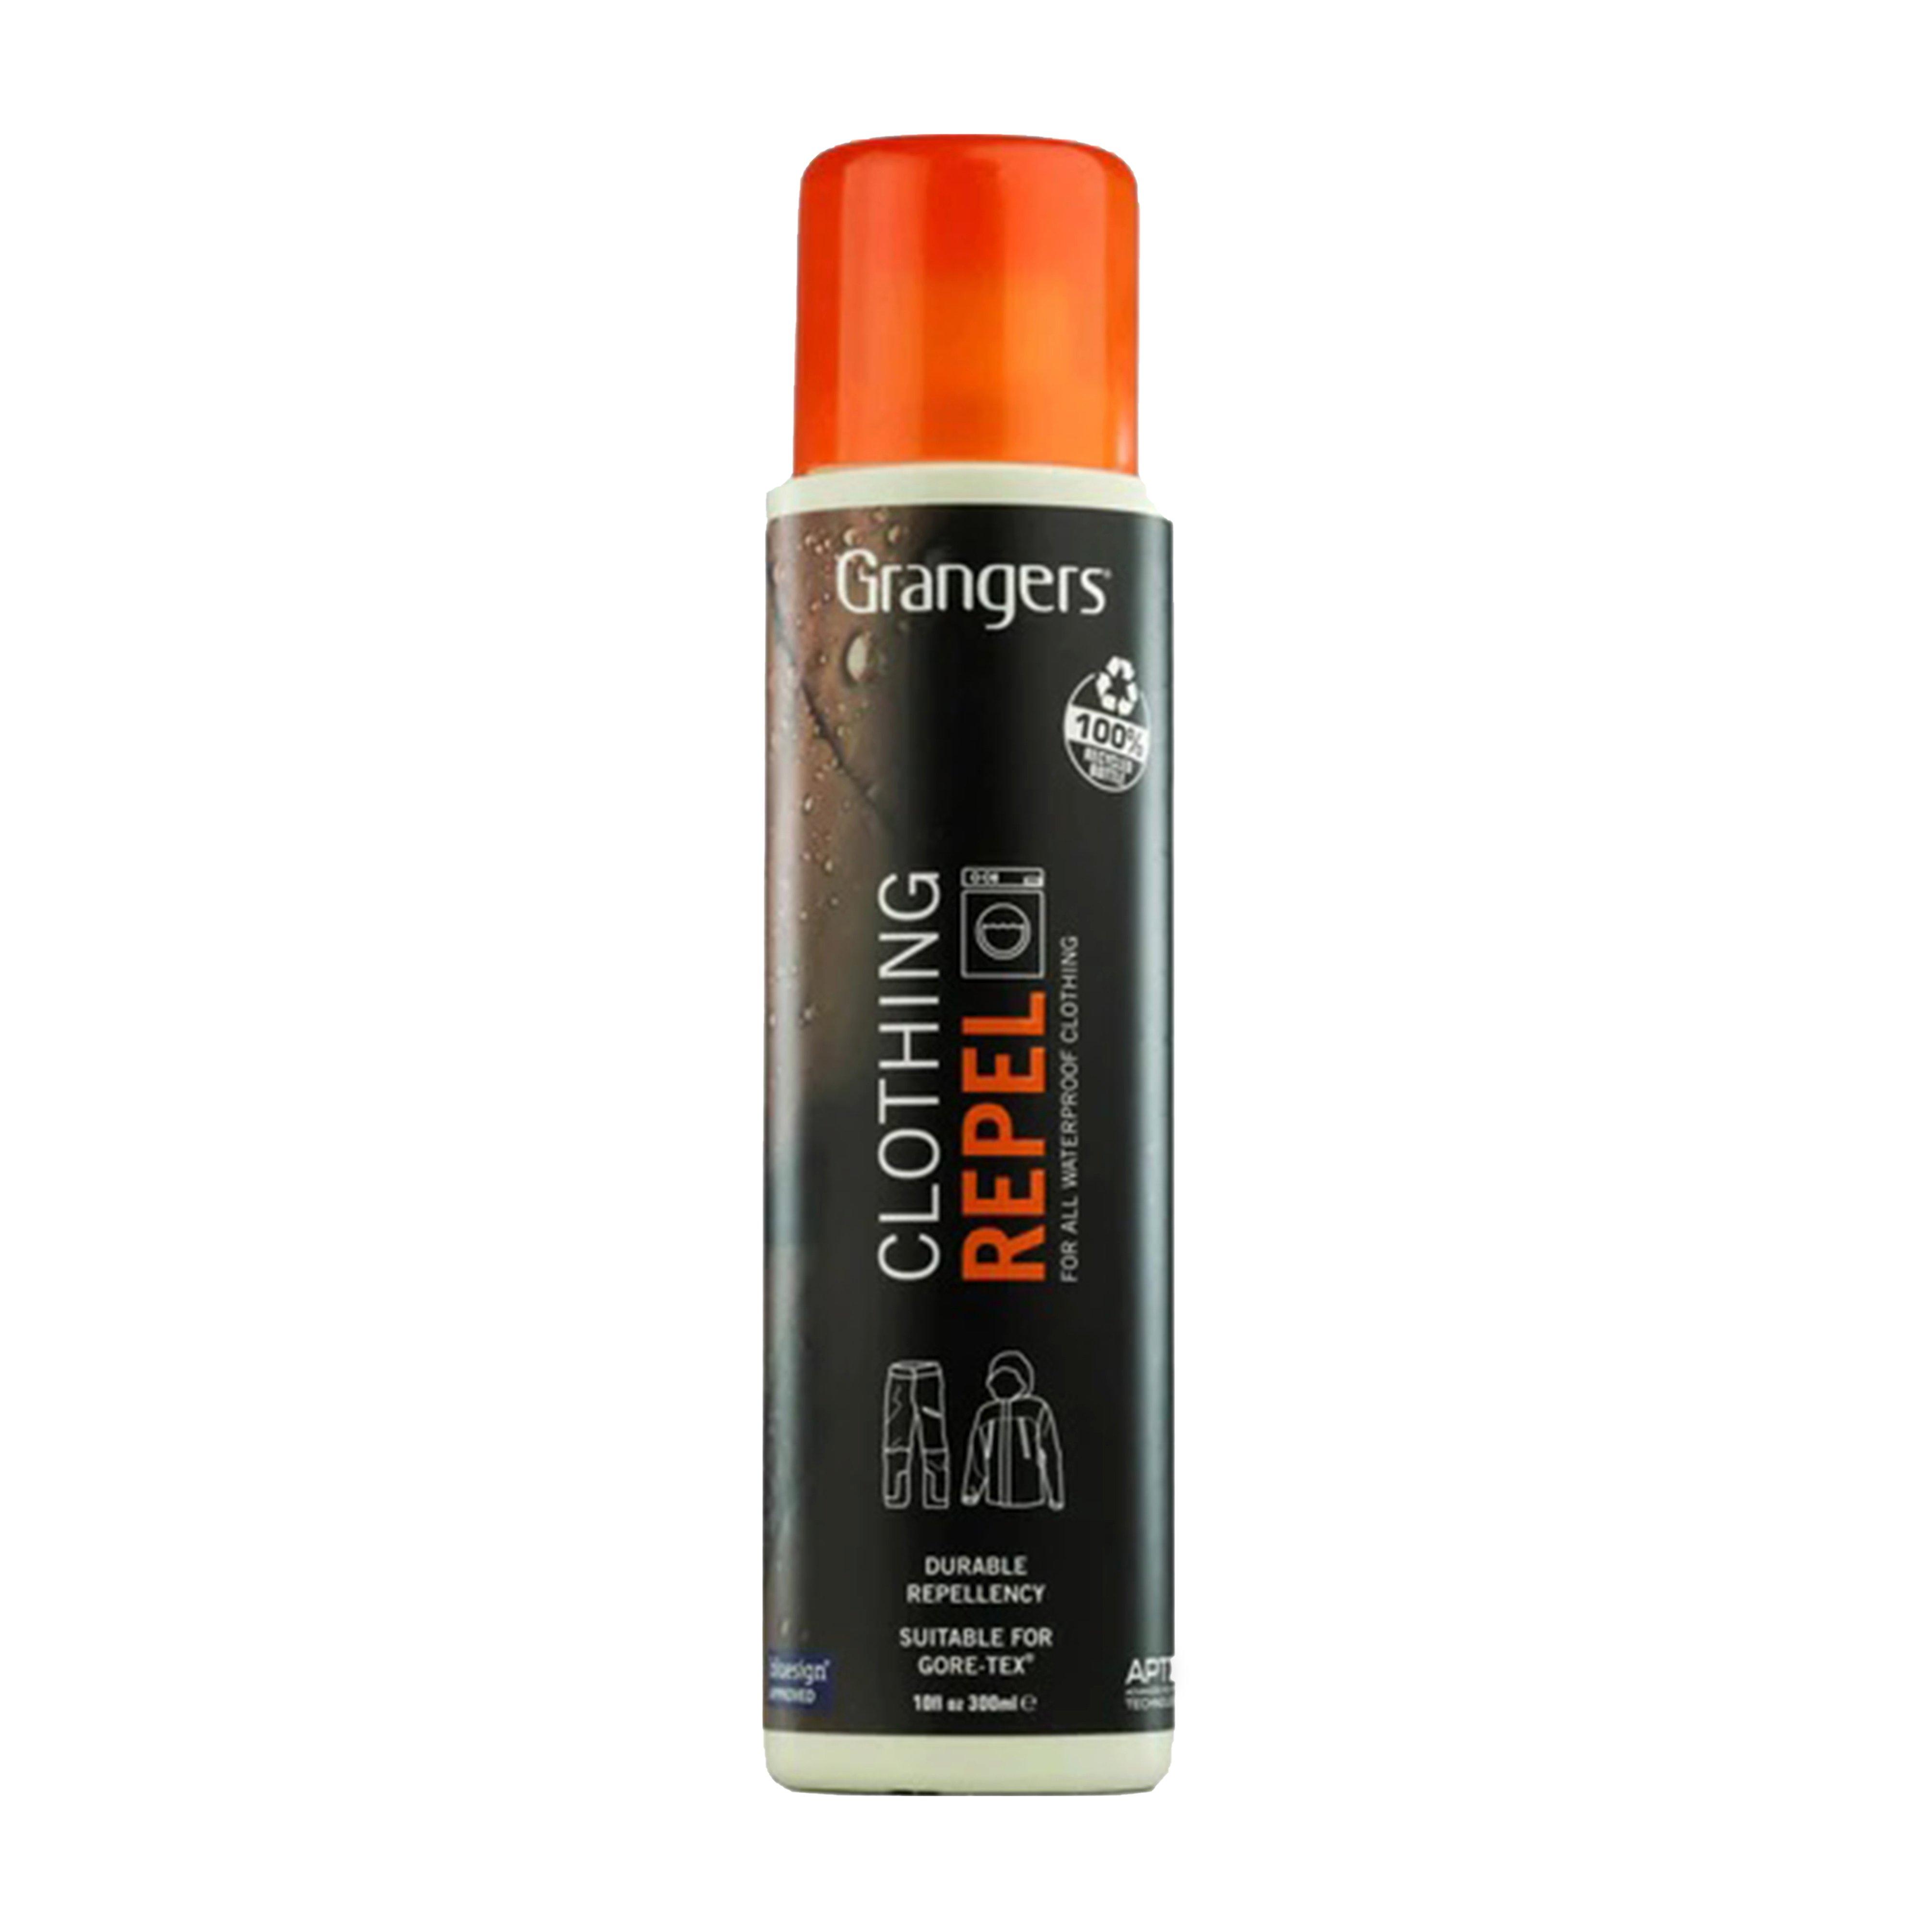 Grangers Clothing Repel (300ml) Review